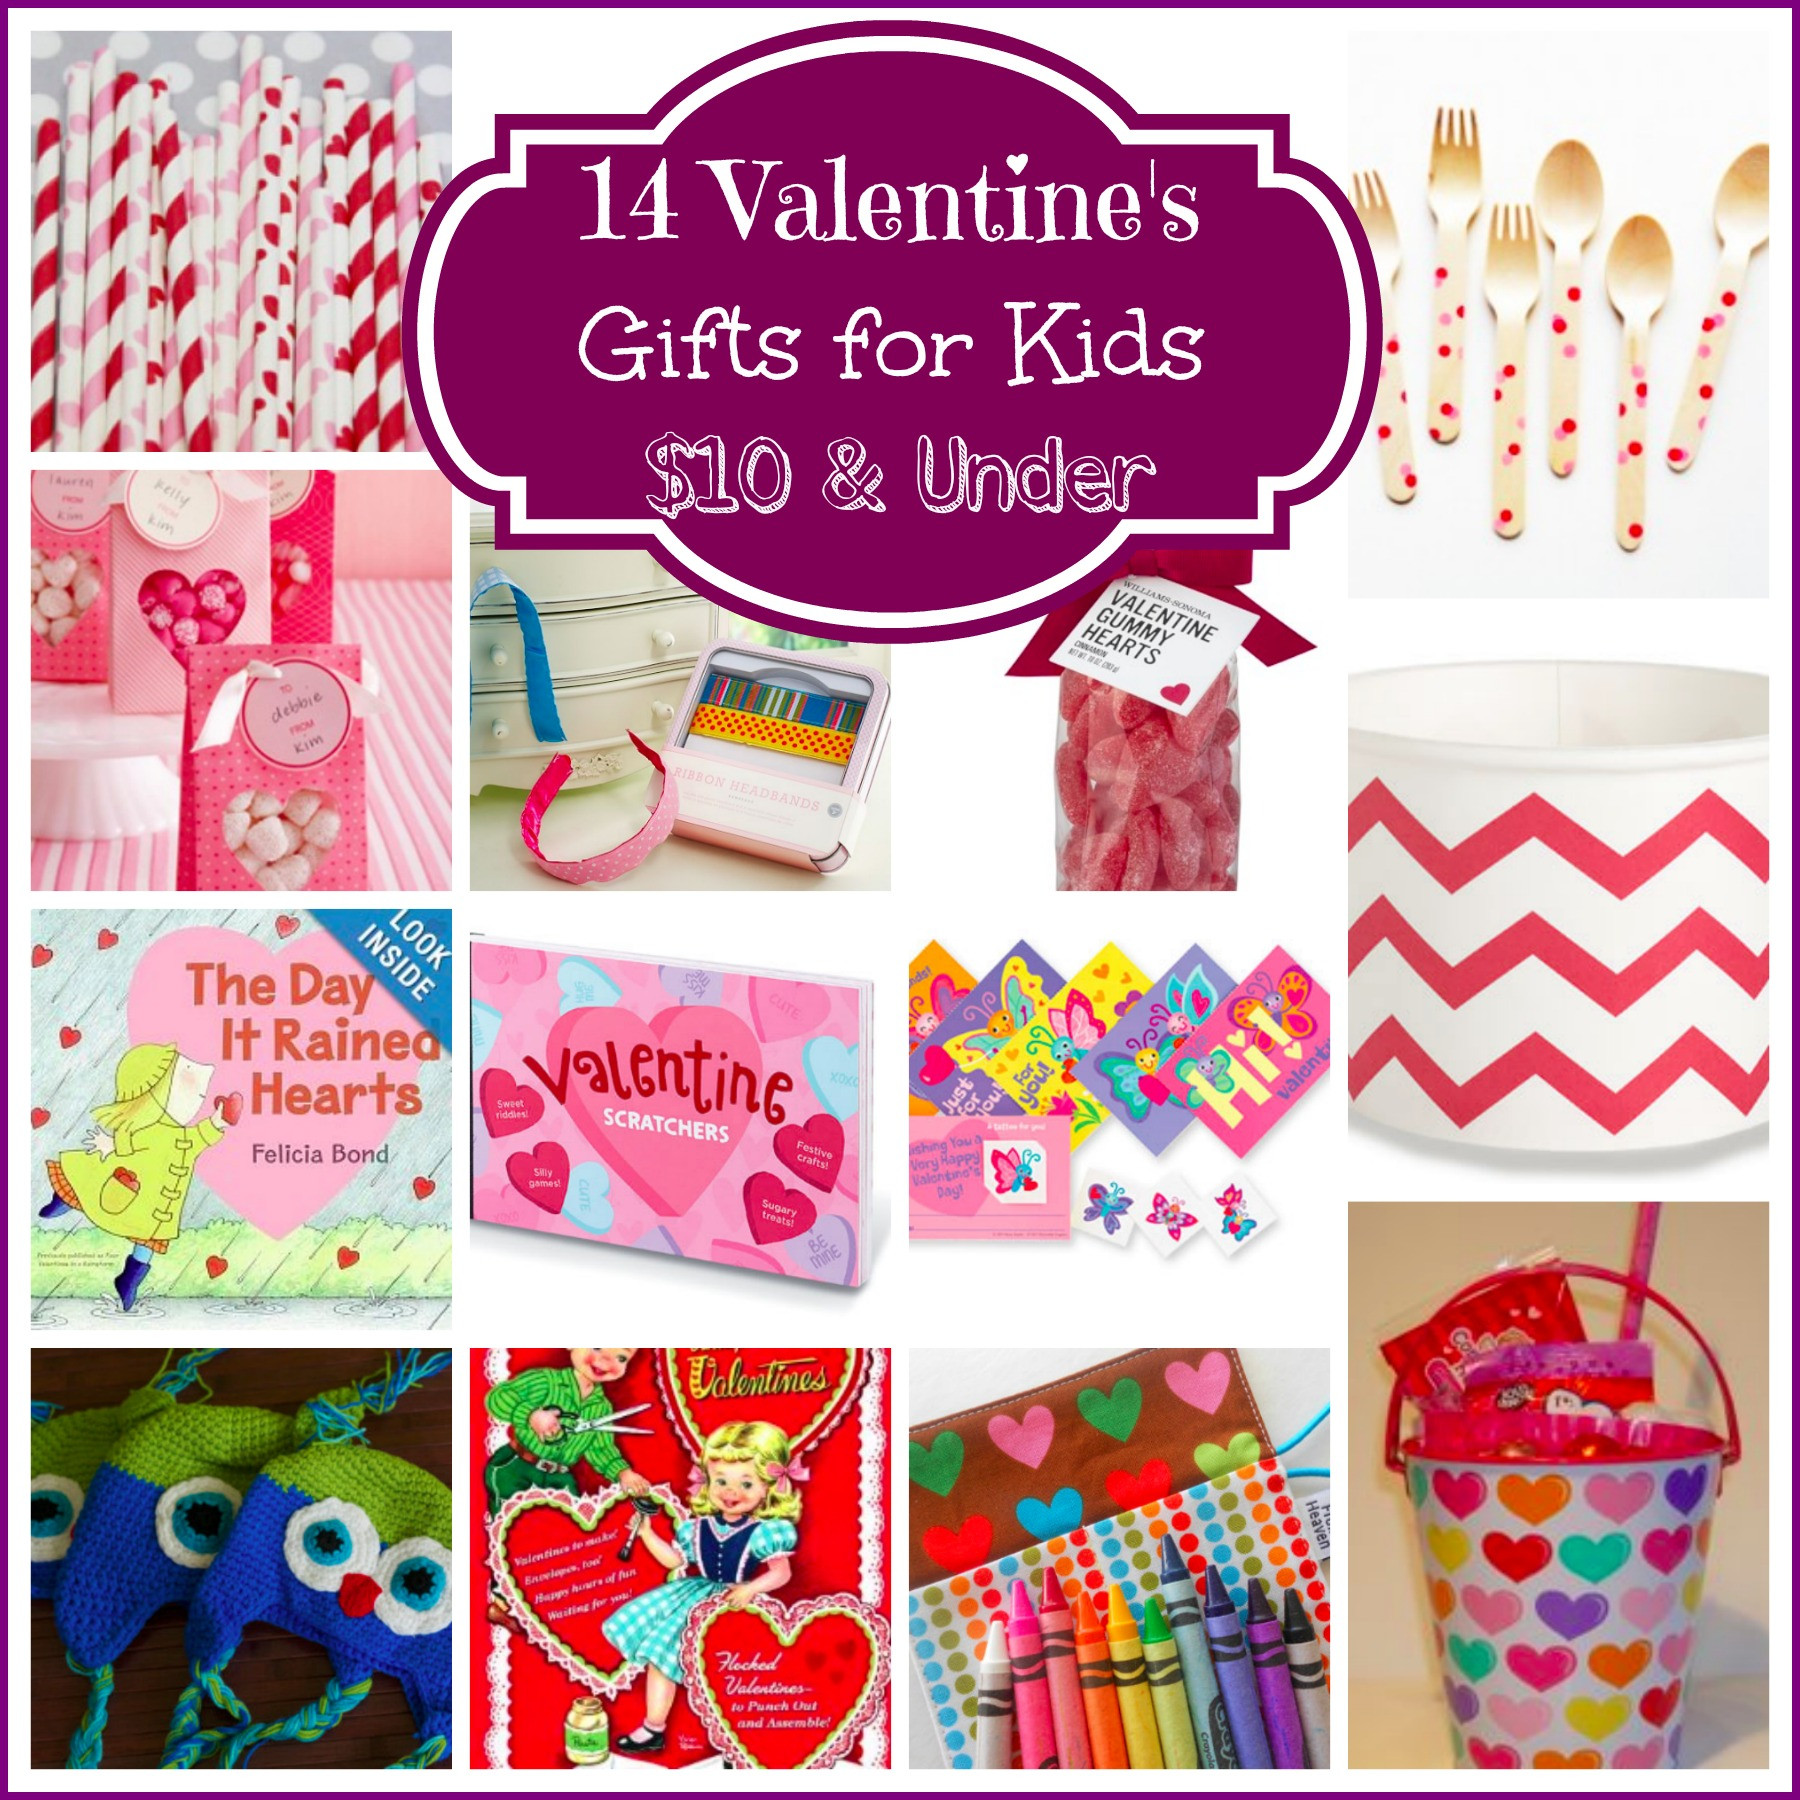 Valentine Day Gifts For Kids
 14 Valentine’s Day Gifts for Kids $10 & Under